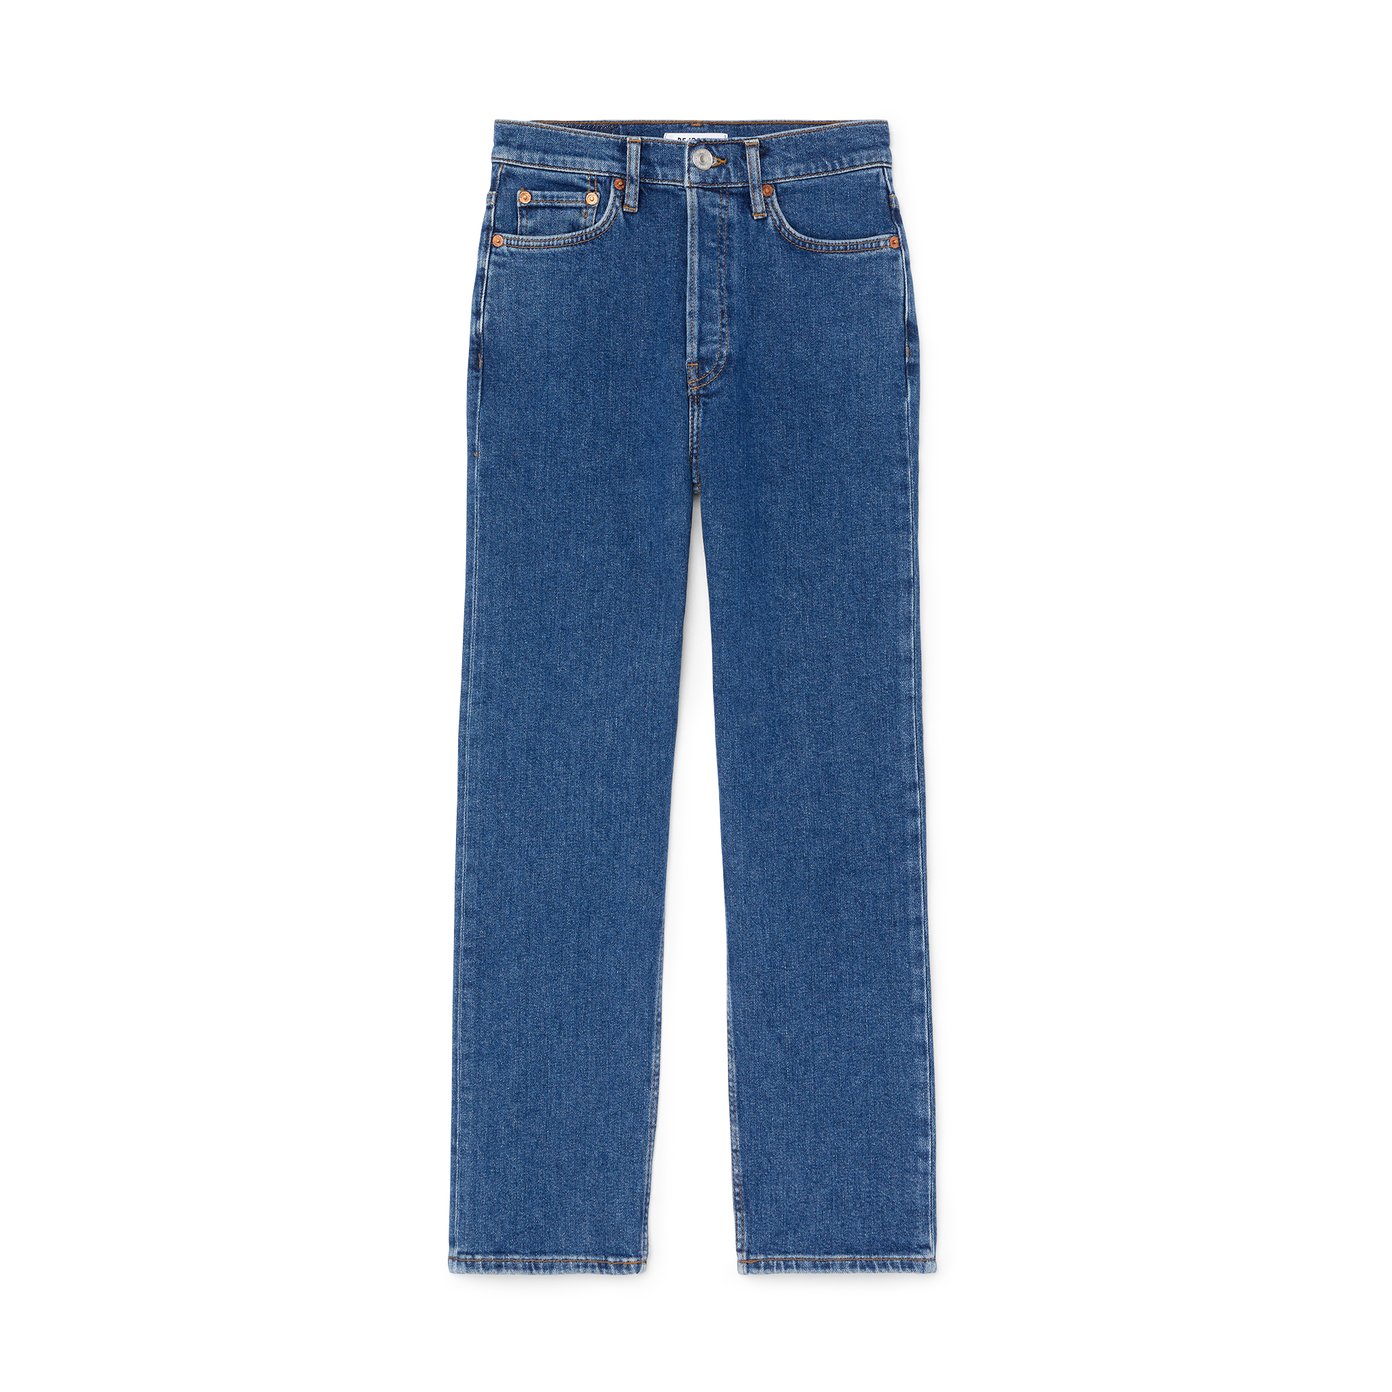 Navy Ultra High Rise Stove Pipe Jeans by Re/Done on Sale